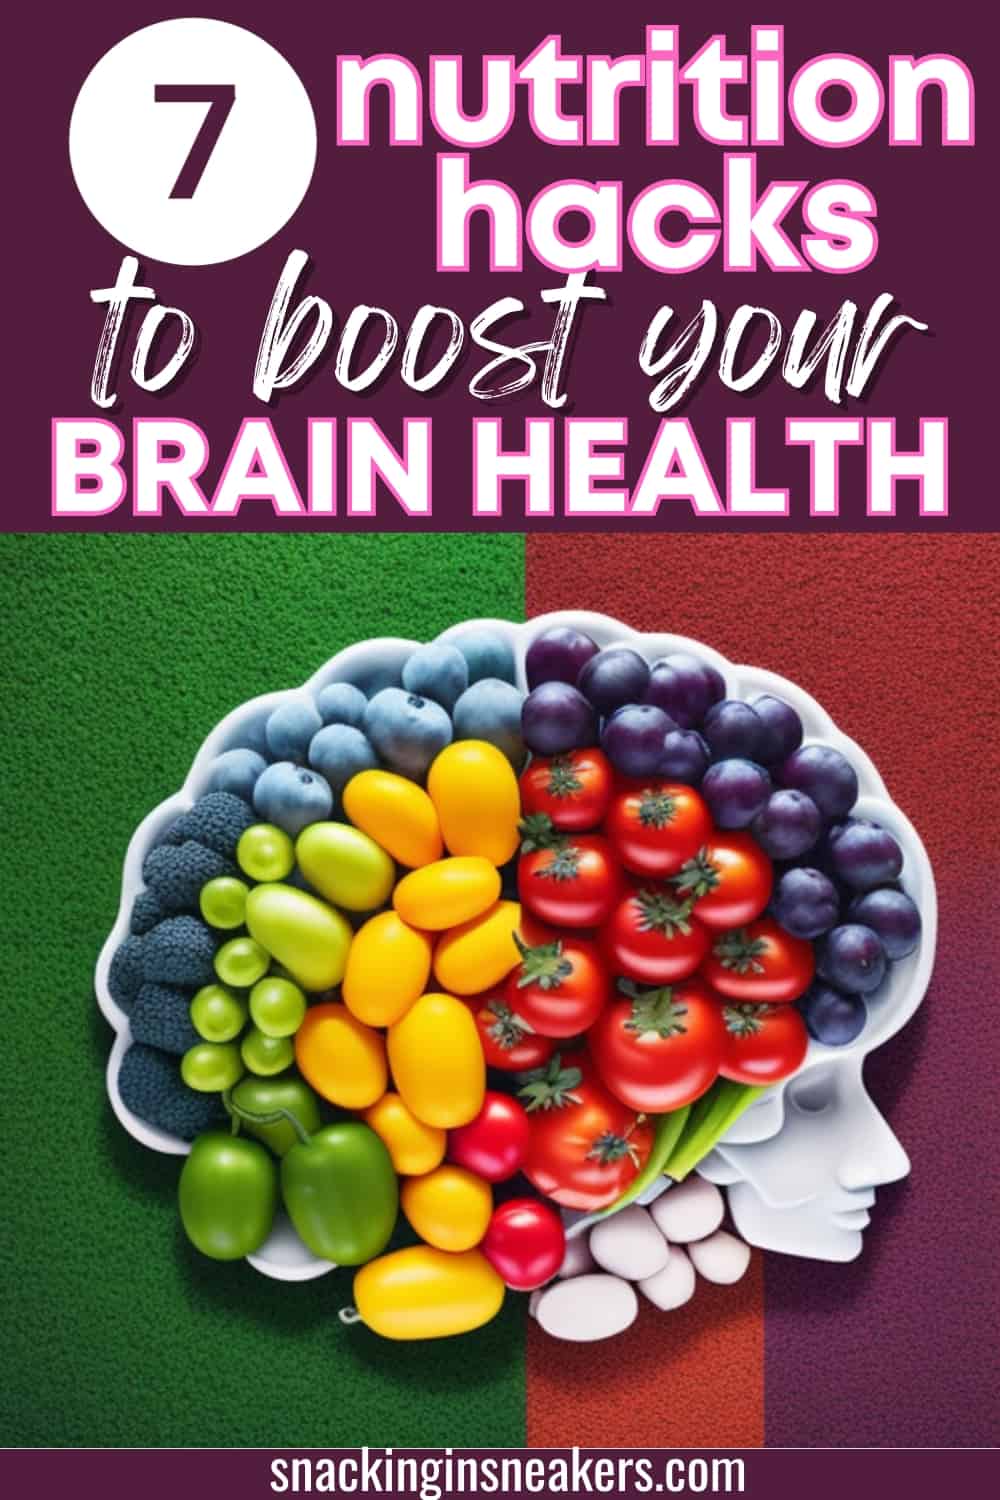 A brain made up of healthy foods with a text overlay that says 7 nutrition hacks to boost your brain health.